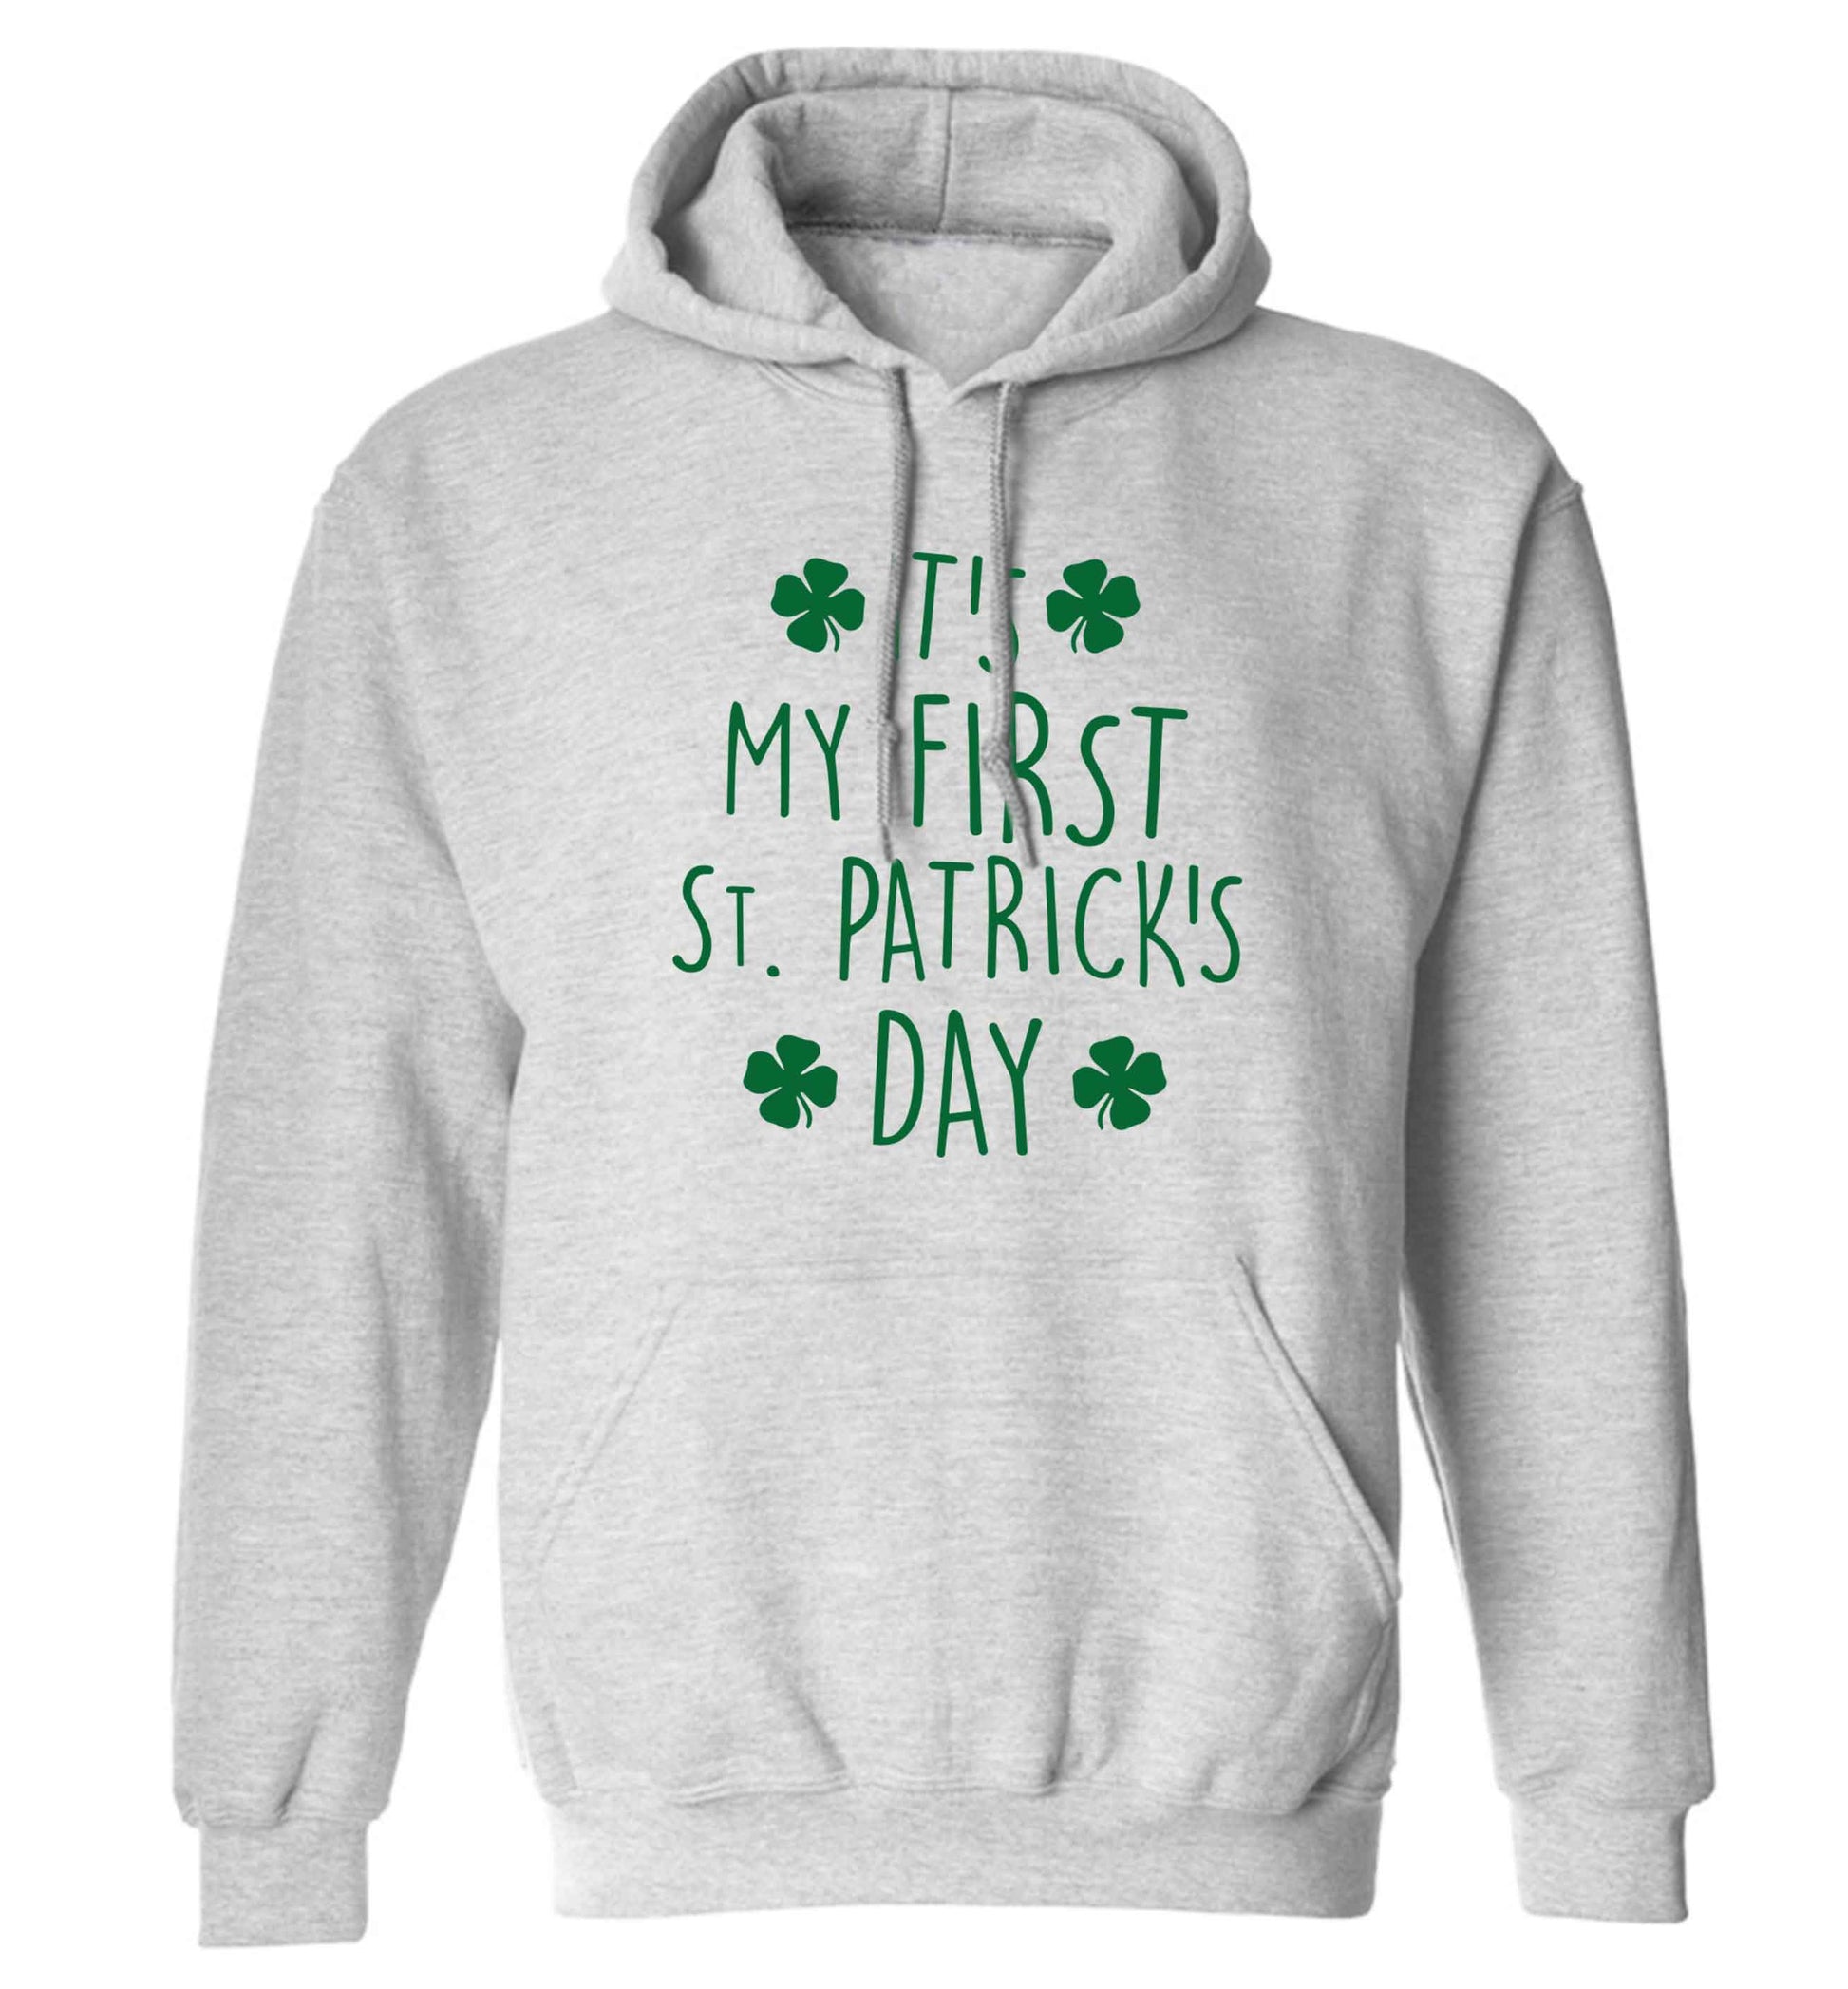 It's my first St.Patrick's day adults unisex grey hoodie 2XL